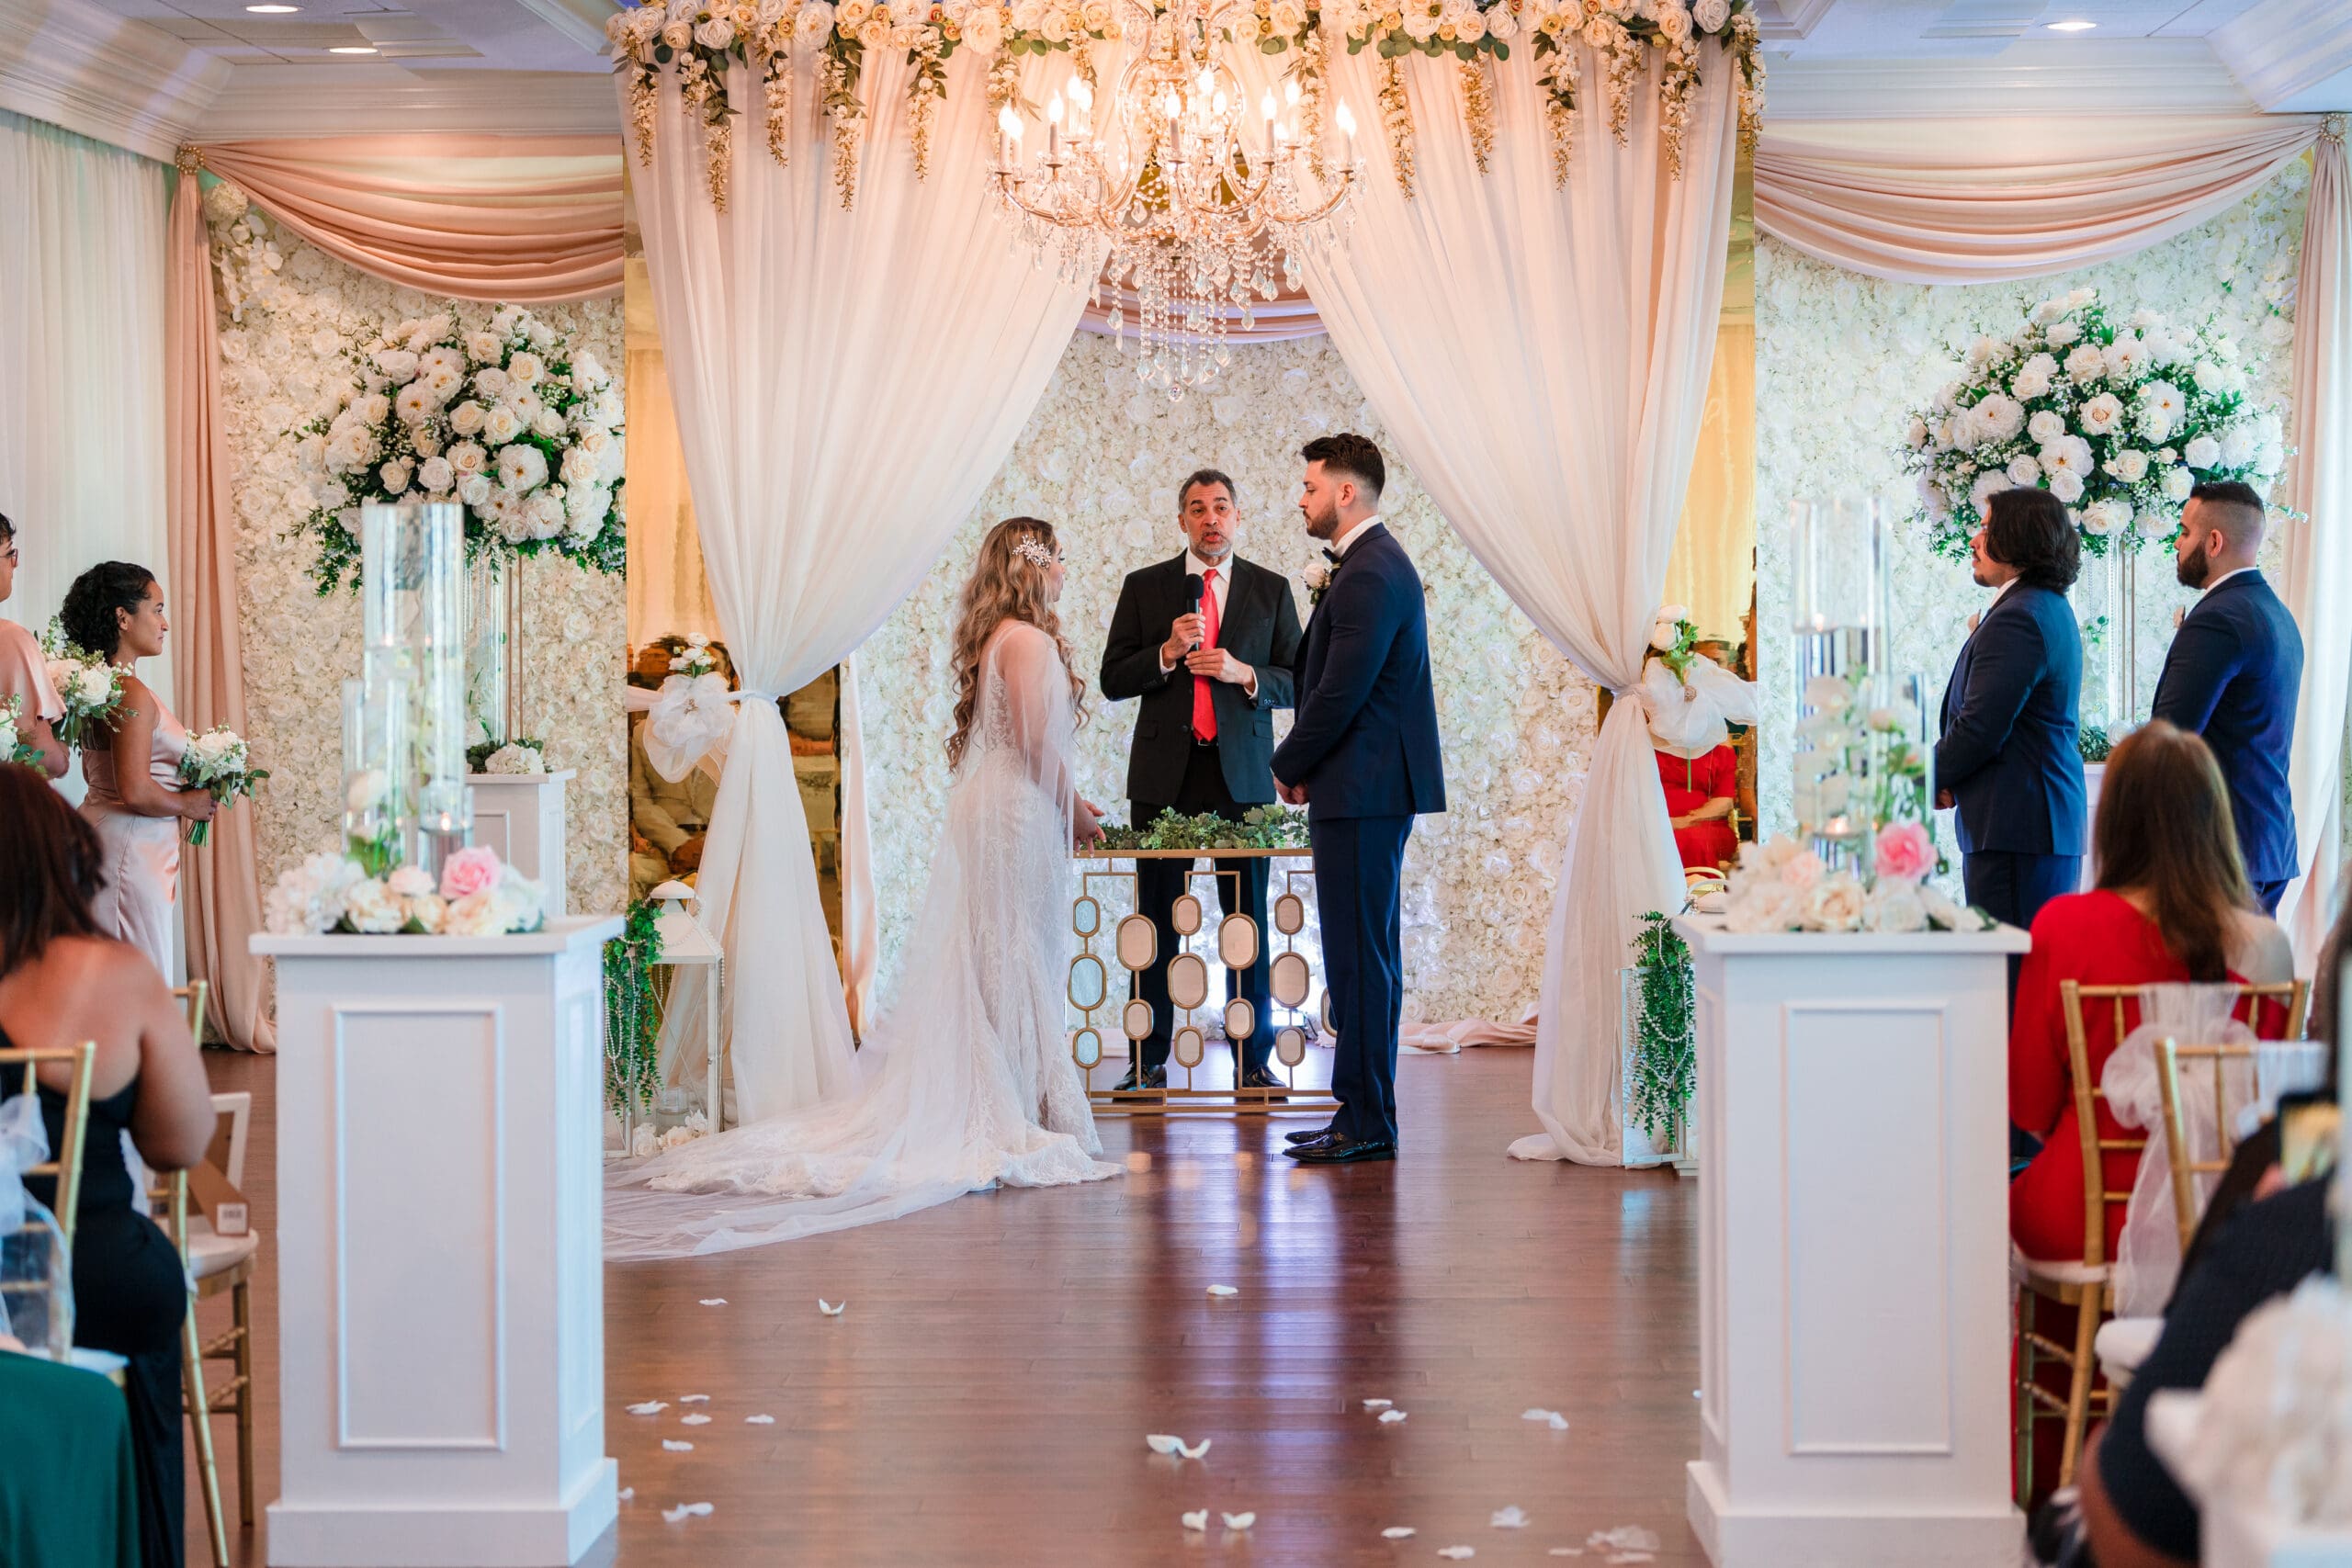 Jenn and Jazer exchanging vows at the altar amidst white drapes and roses, Crystal Ballroom Sunset Harbor.